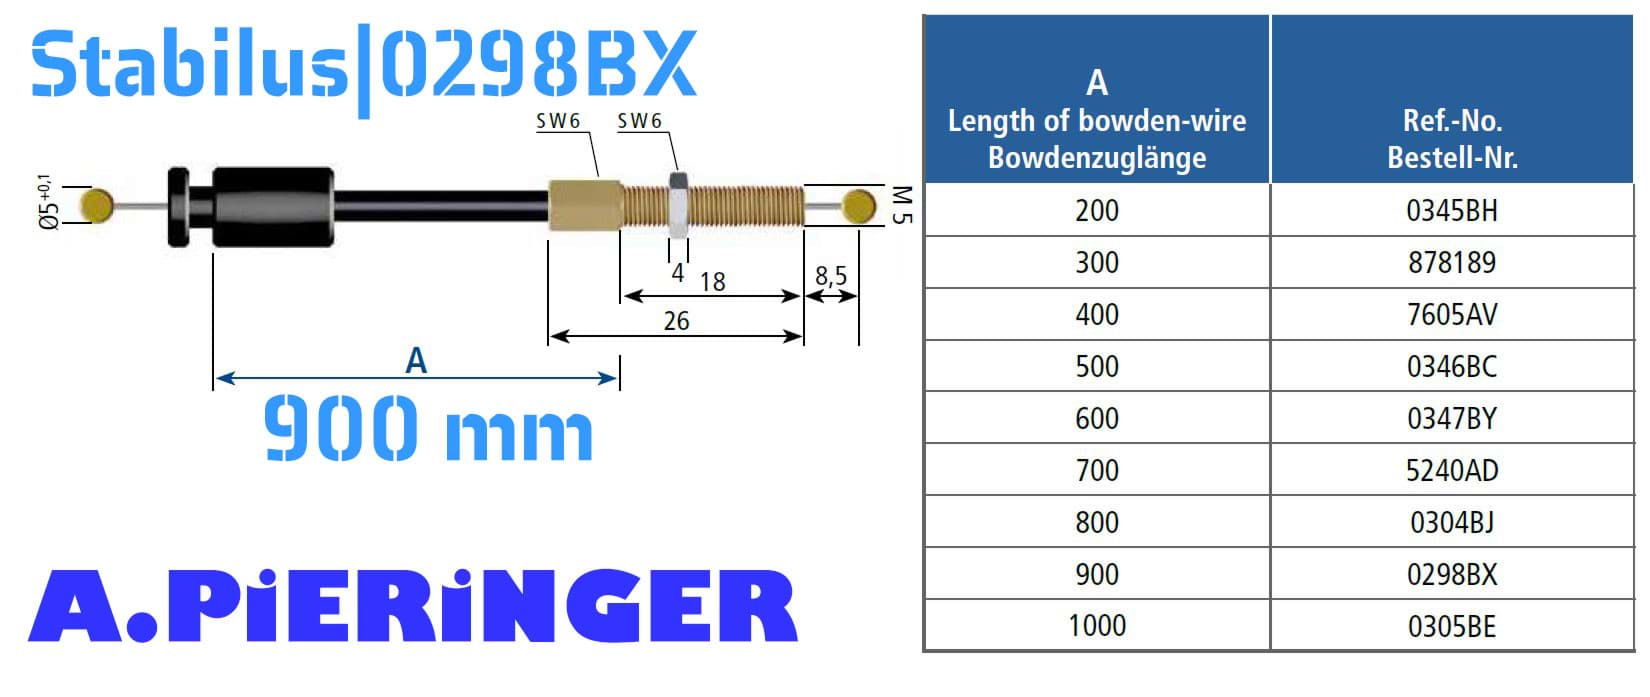 Picture of Stabilus 0298BX BOWDENZUGN 900 lang